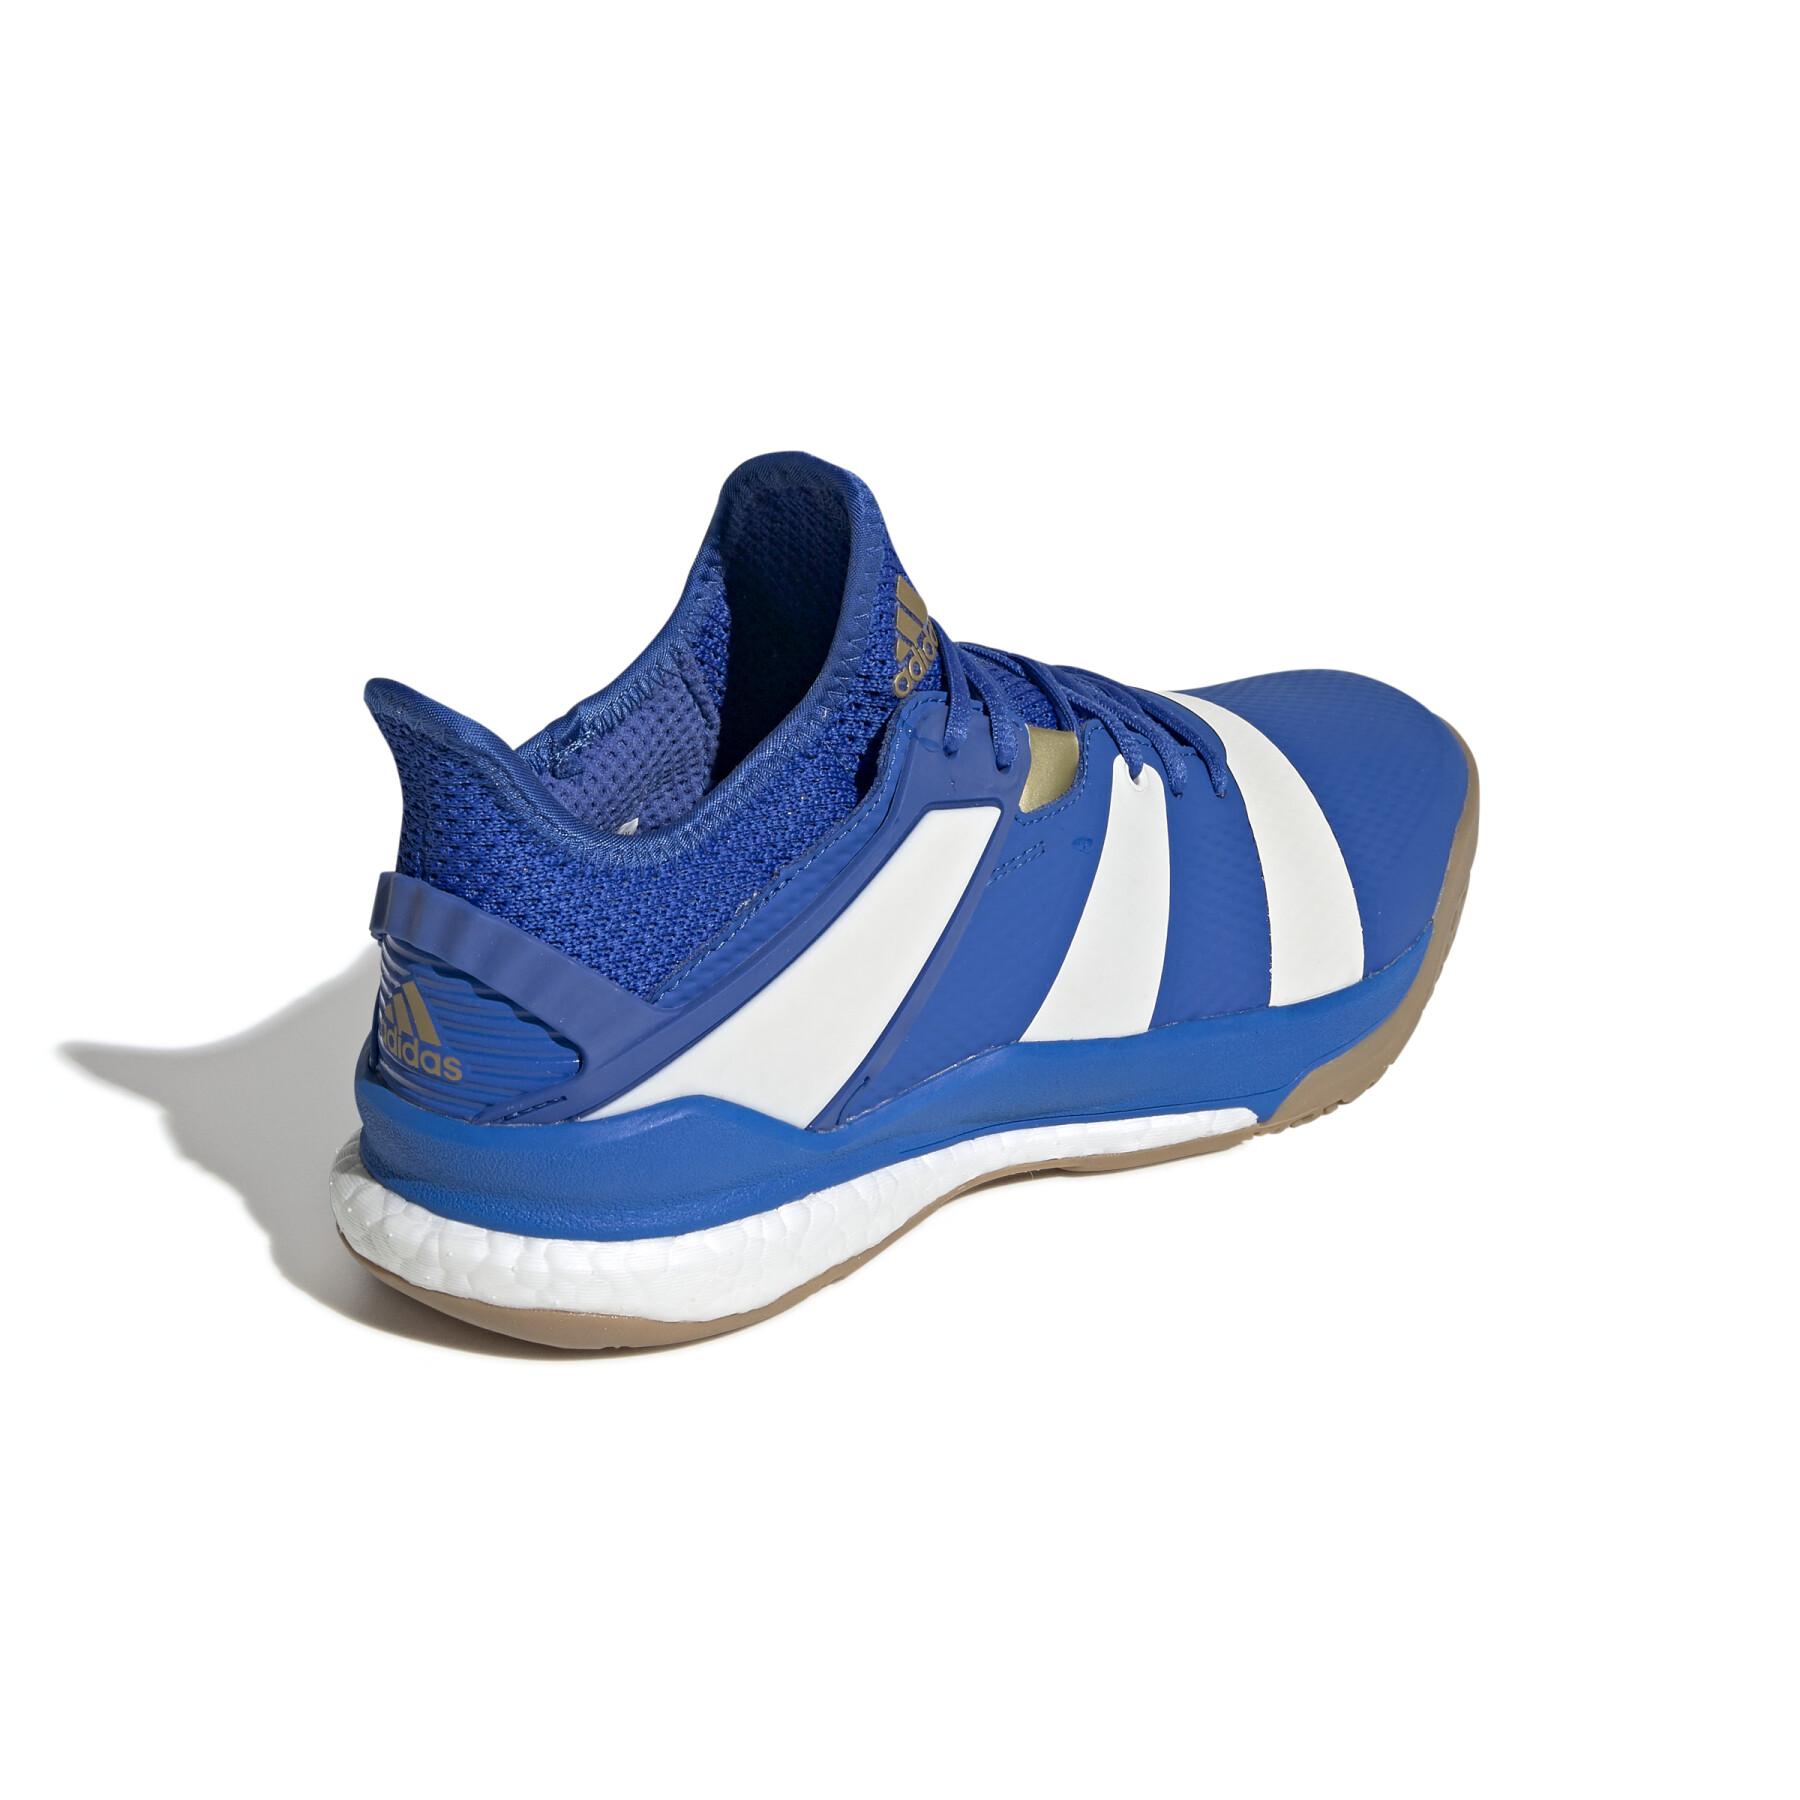 Chaussures adidas Stabil X